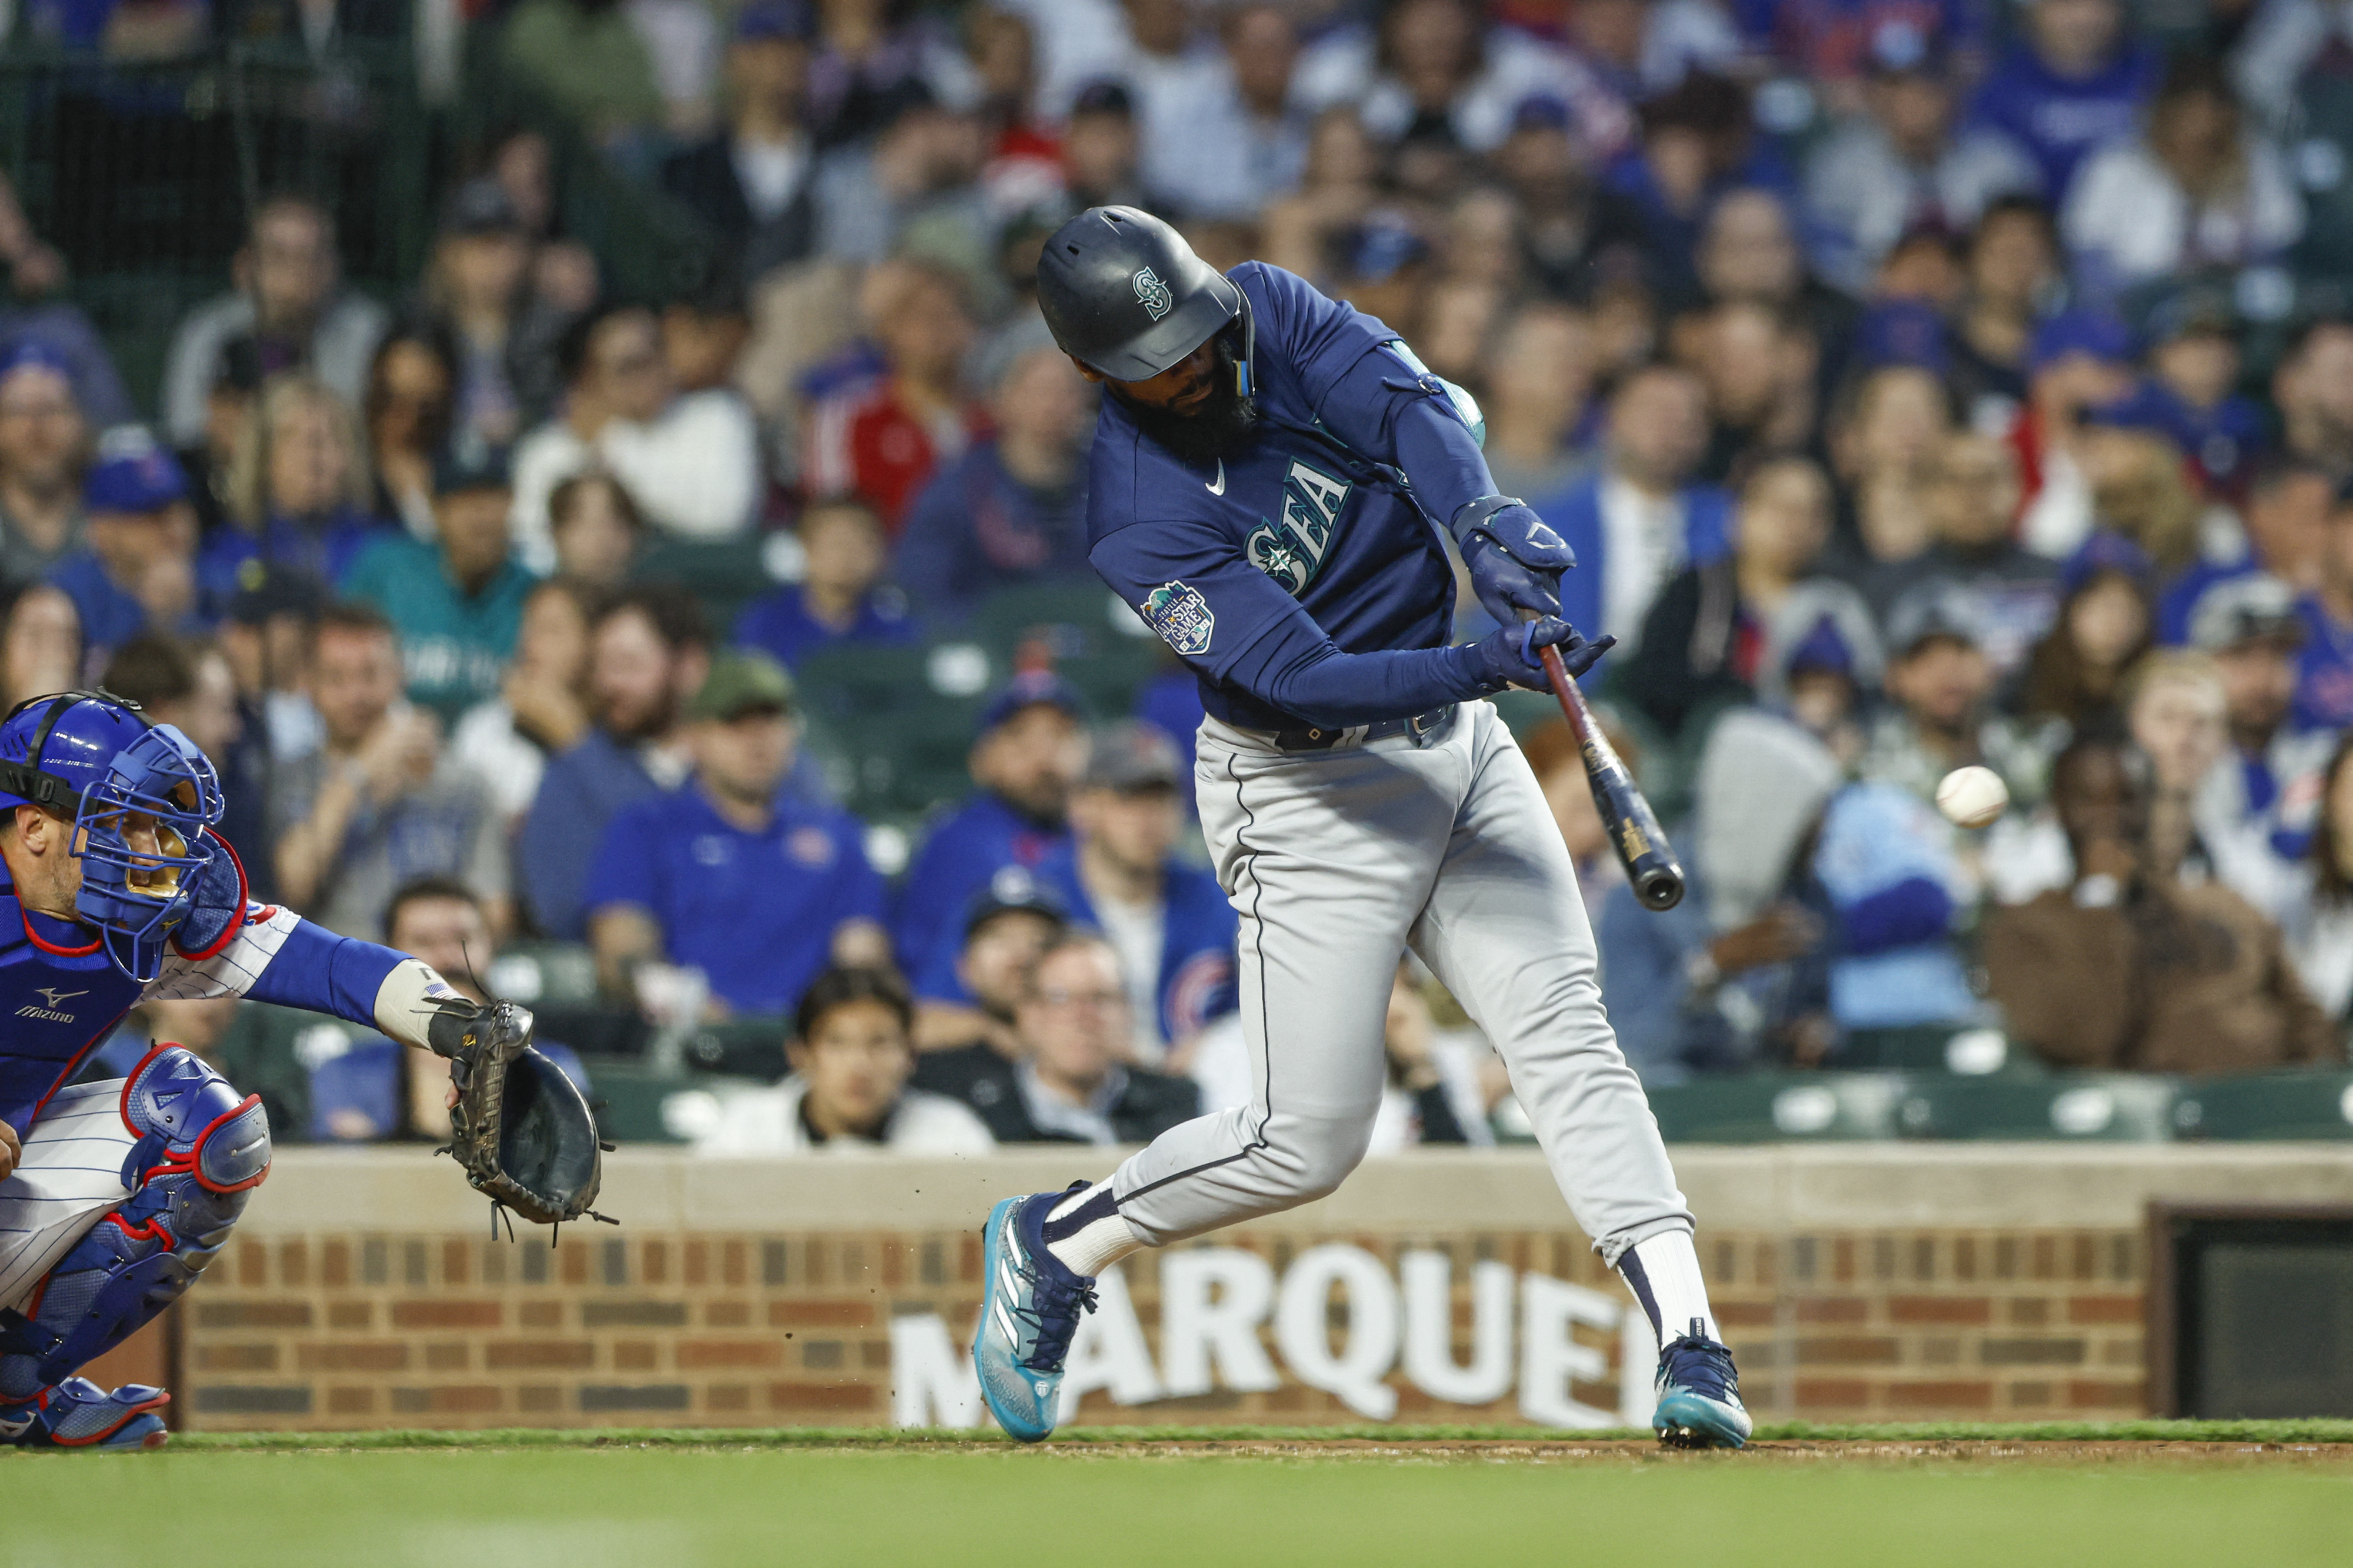 Cubs walk-off Mariners in the 10th, Sports